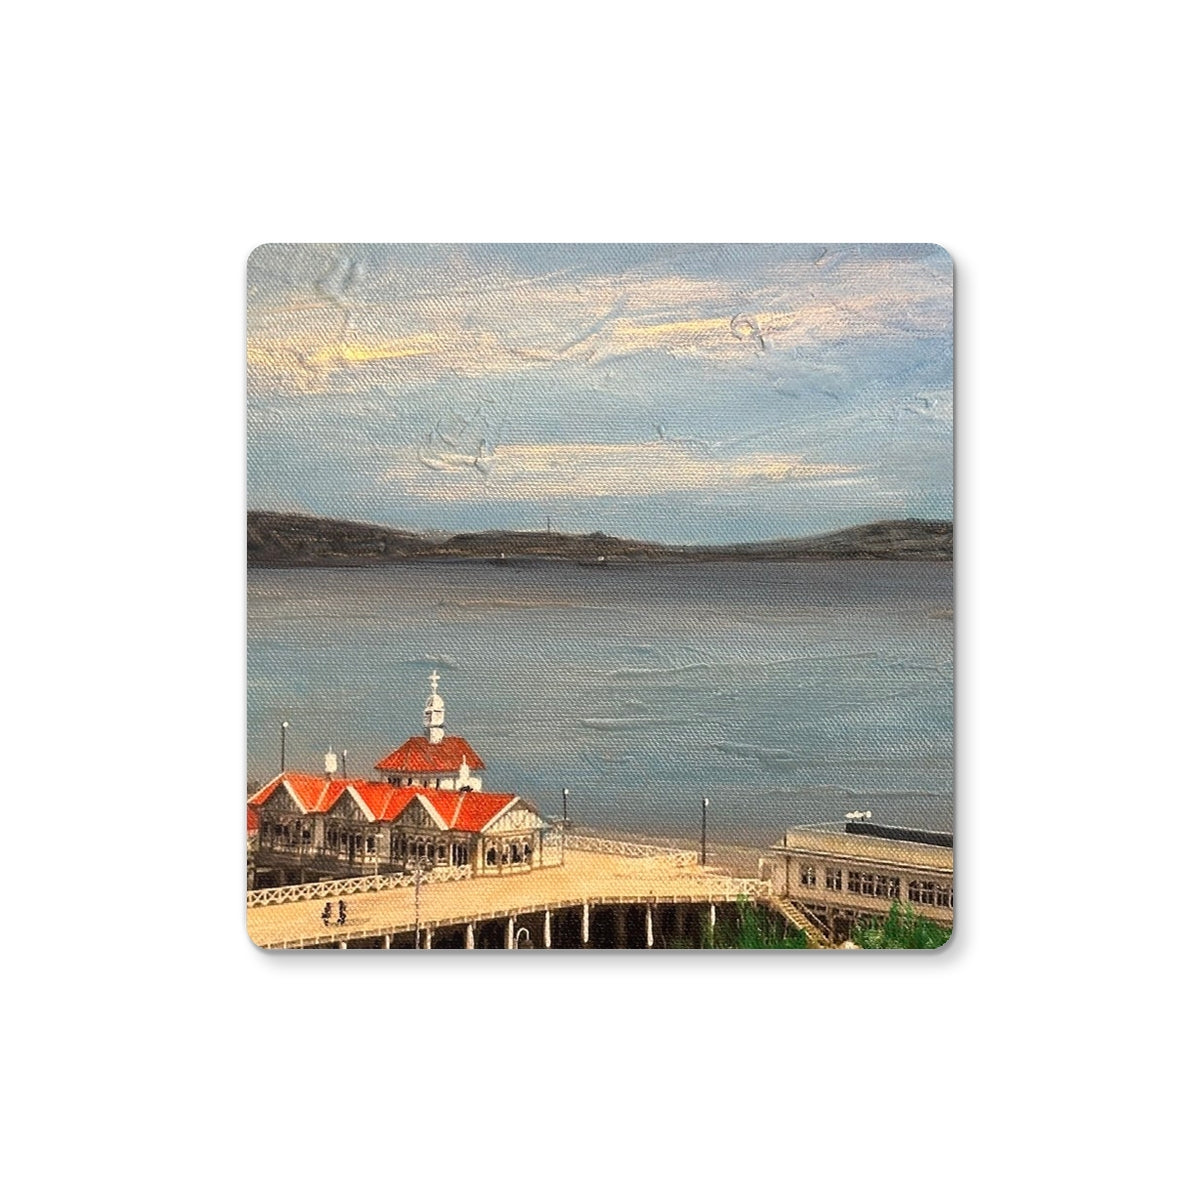 Looking From Dunoon Art Gifts Coaster-Homeware-River Clyde Art Gallery-2 Coasters-Paintings, Prints, Homeware, Art Gifts From Scotland By Scottish Artist Kevin Hunter